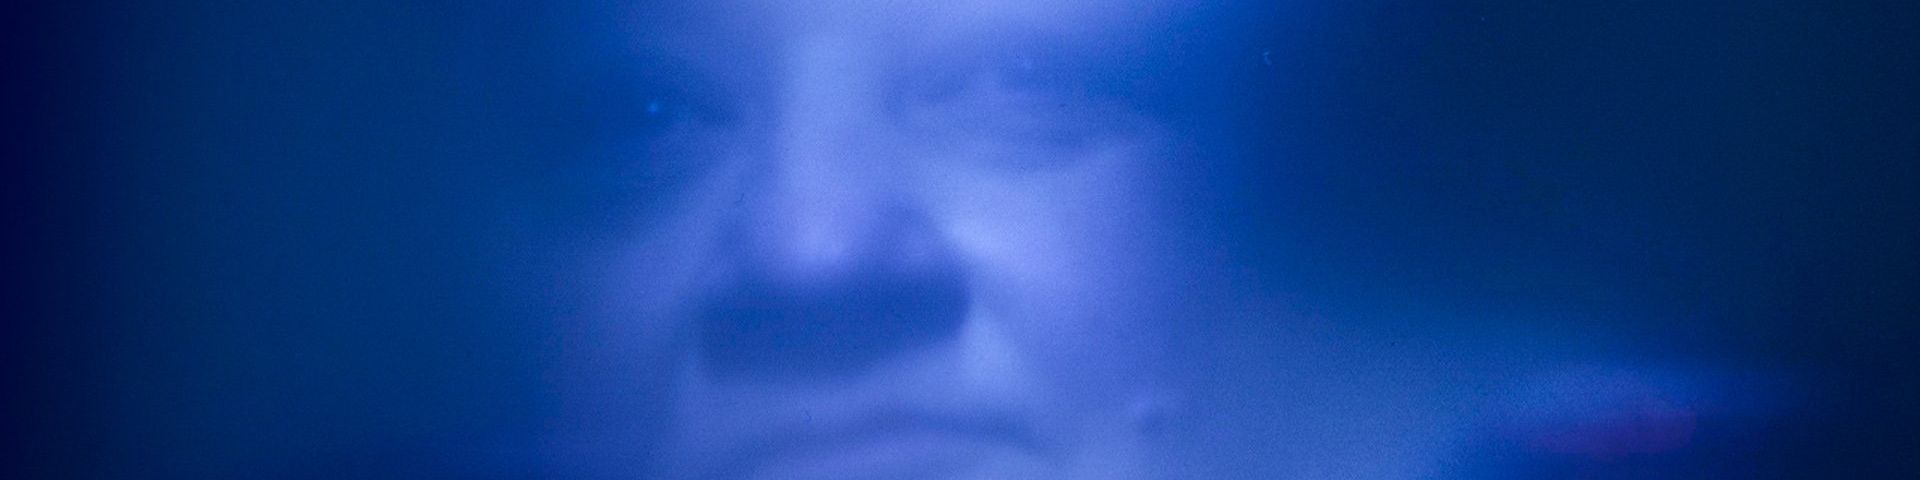 A clouded and slightly blurred image, all in blue. Through it, the features of a woman’s face can be seen. © Daphne Wageman